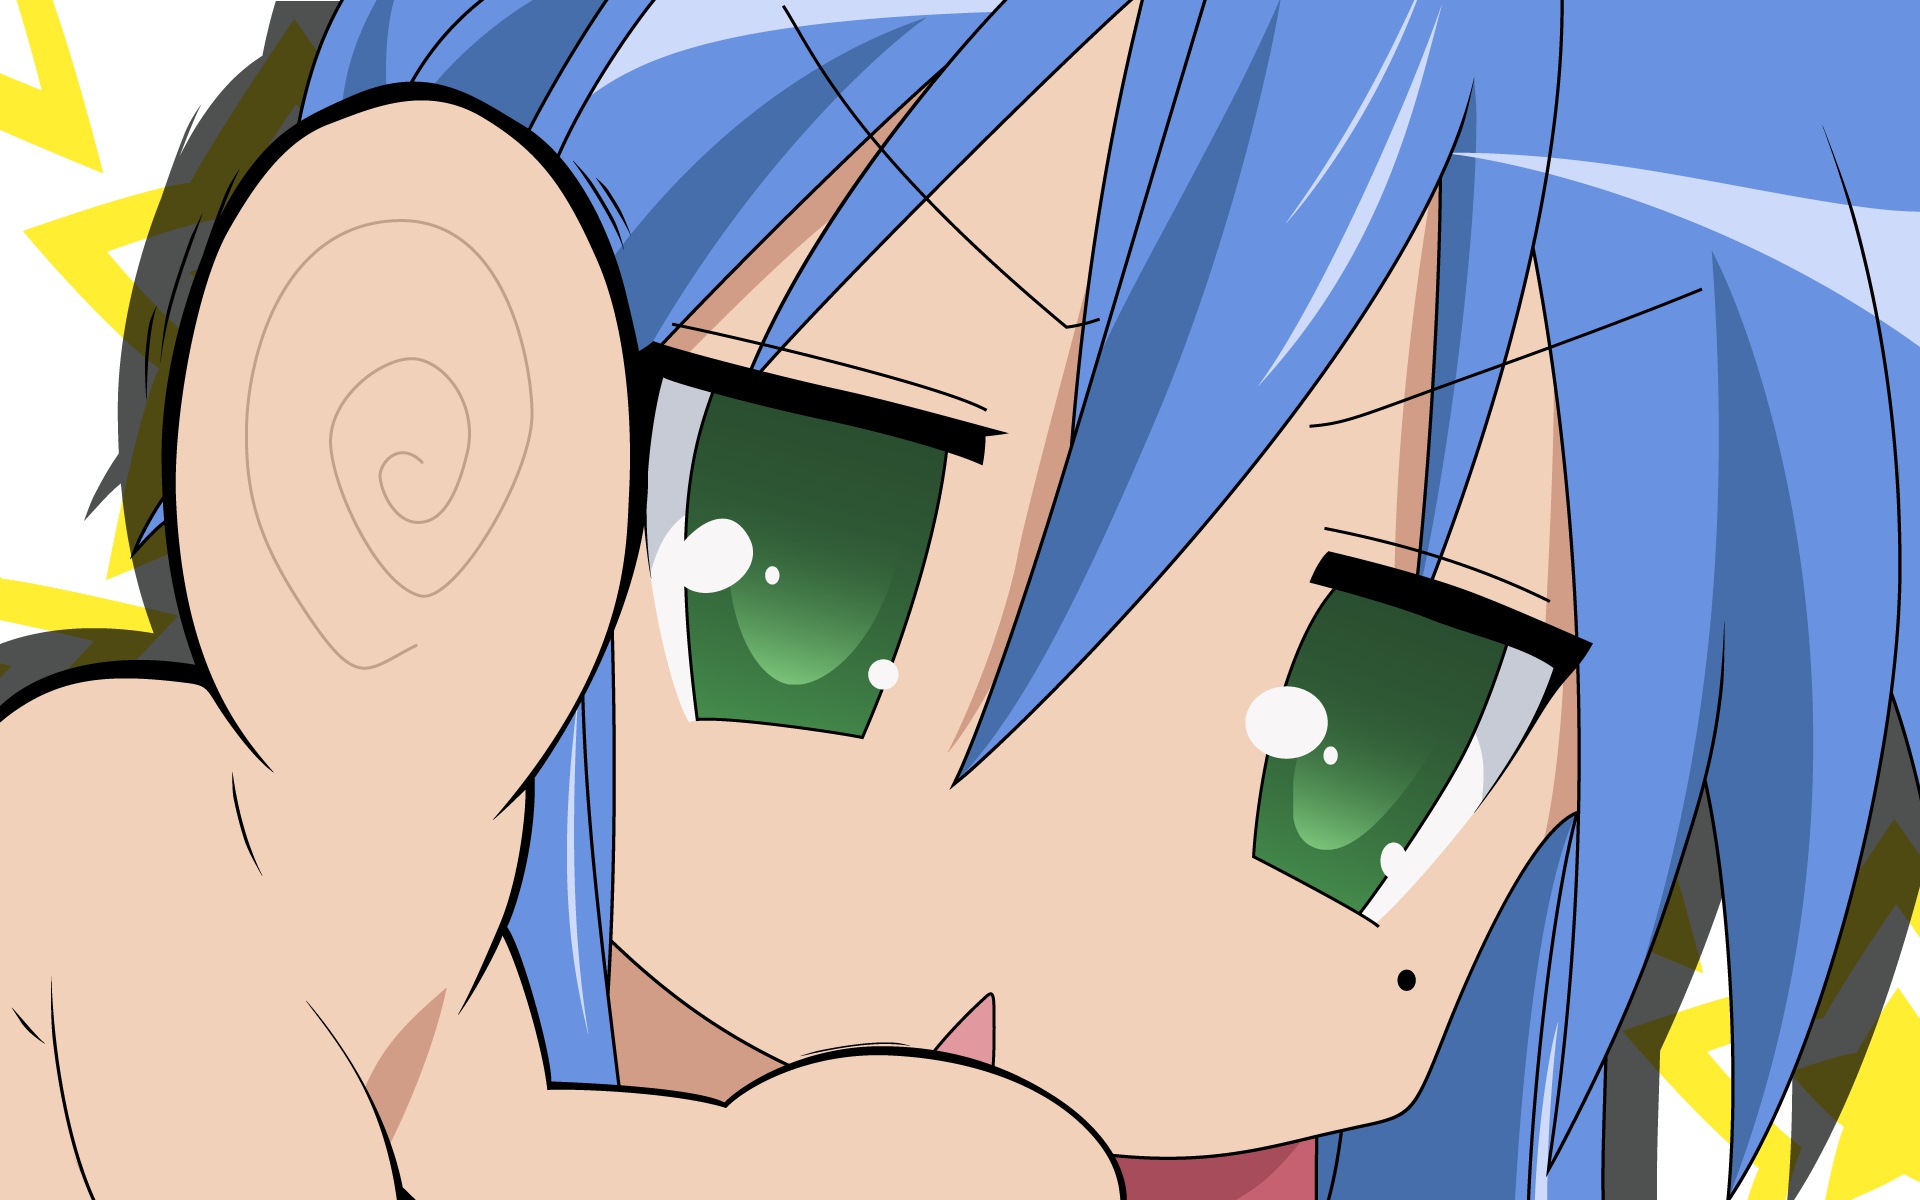 Konata Izumi from Lucky Star anime. A playful character with blue hair and a mischievous smile.